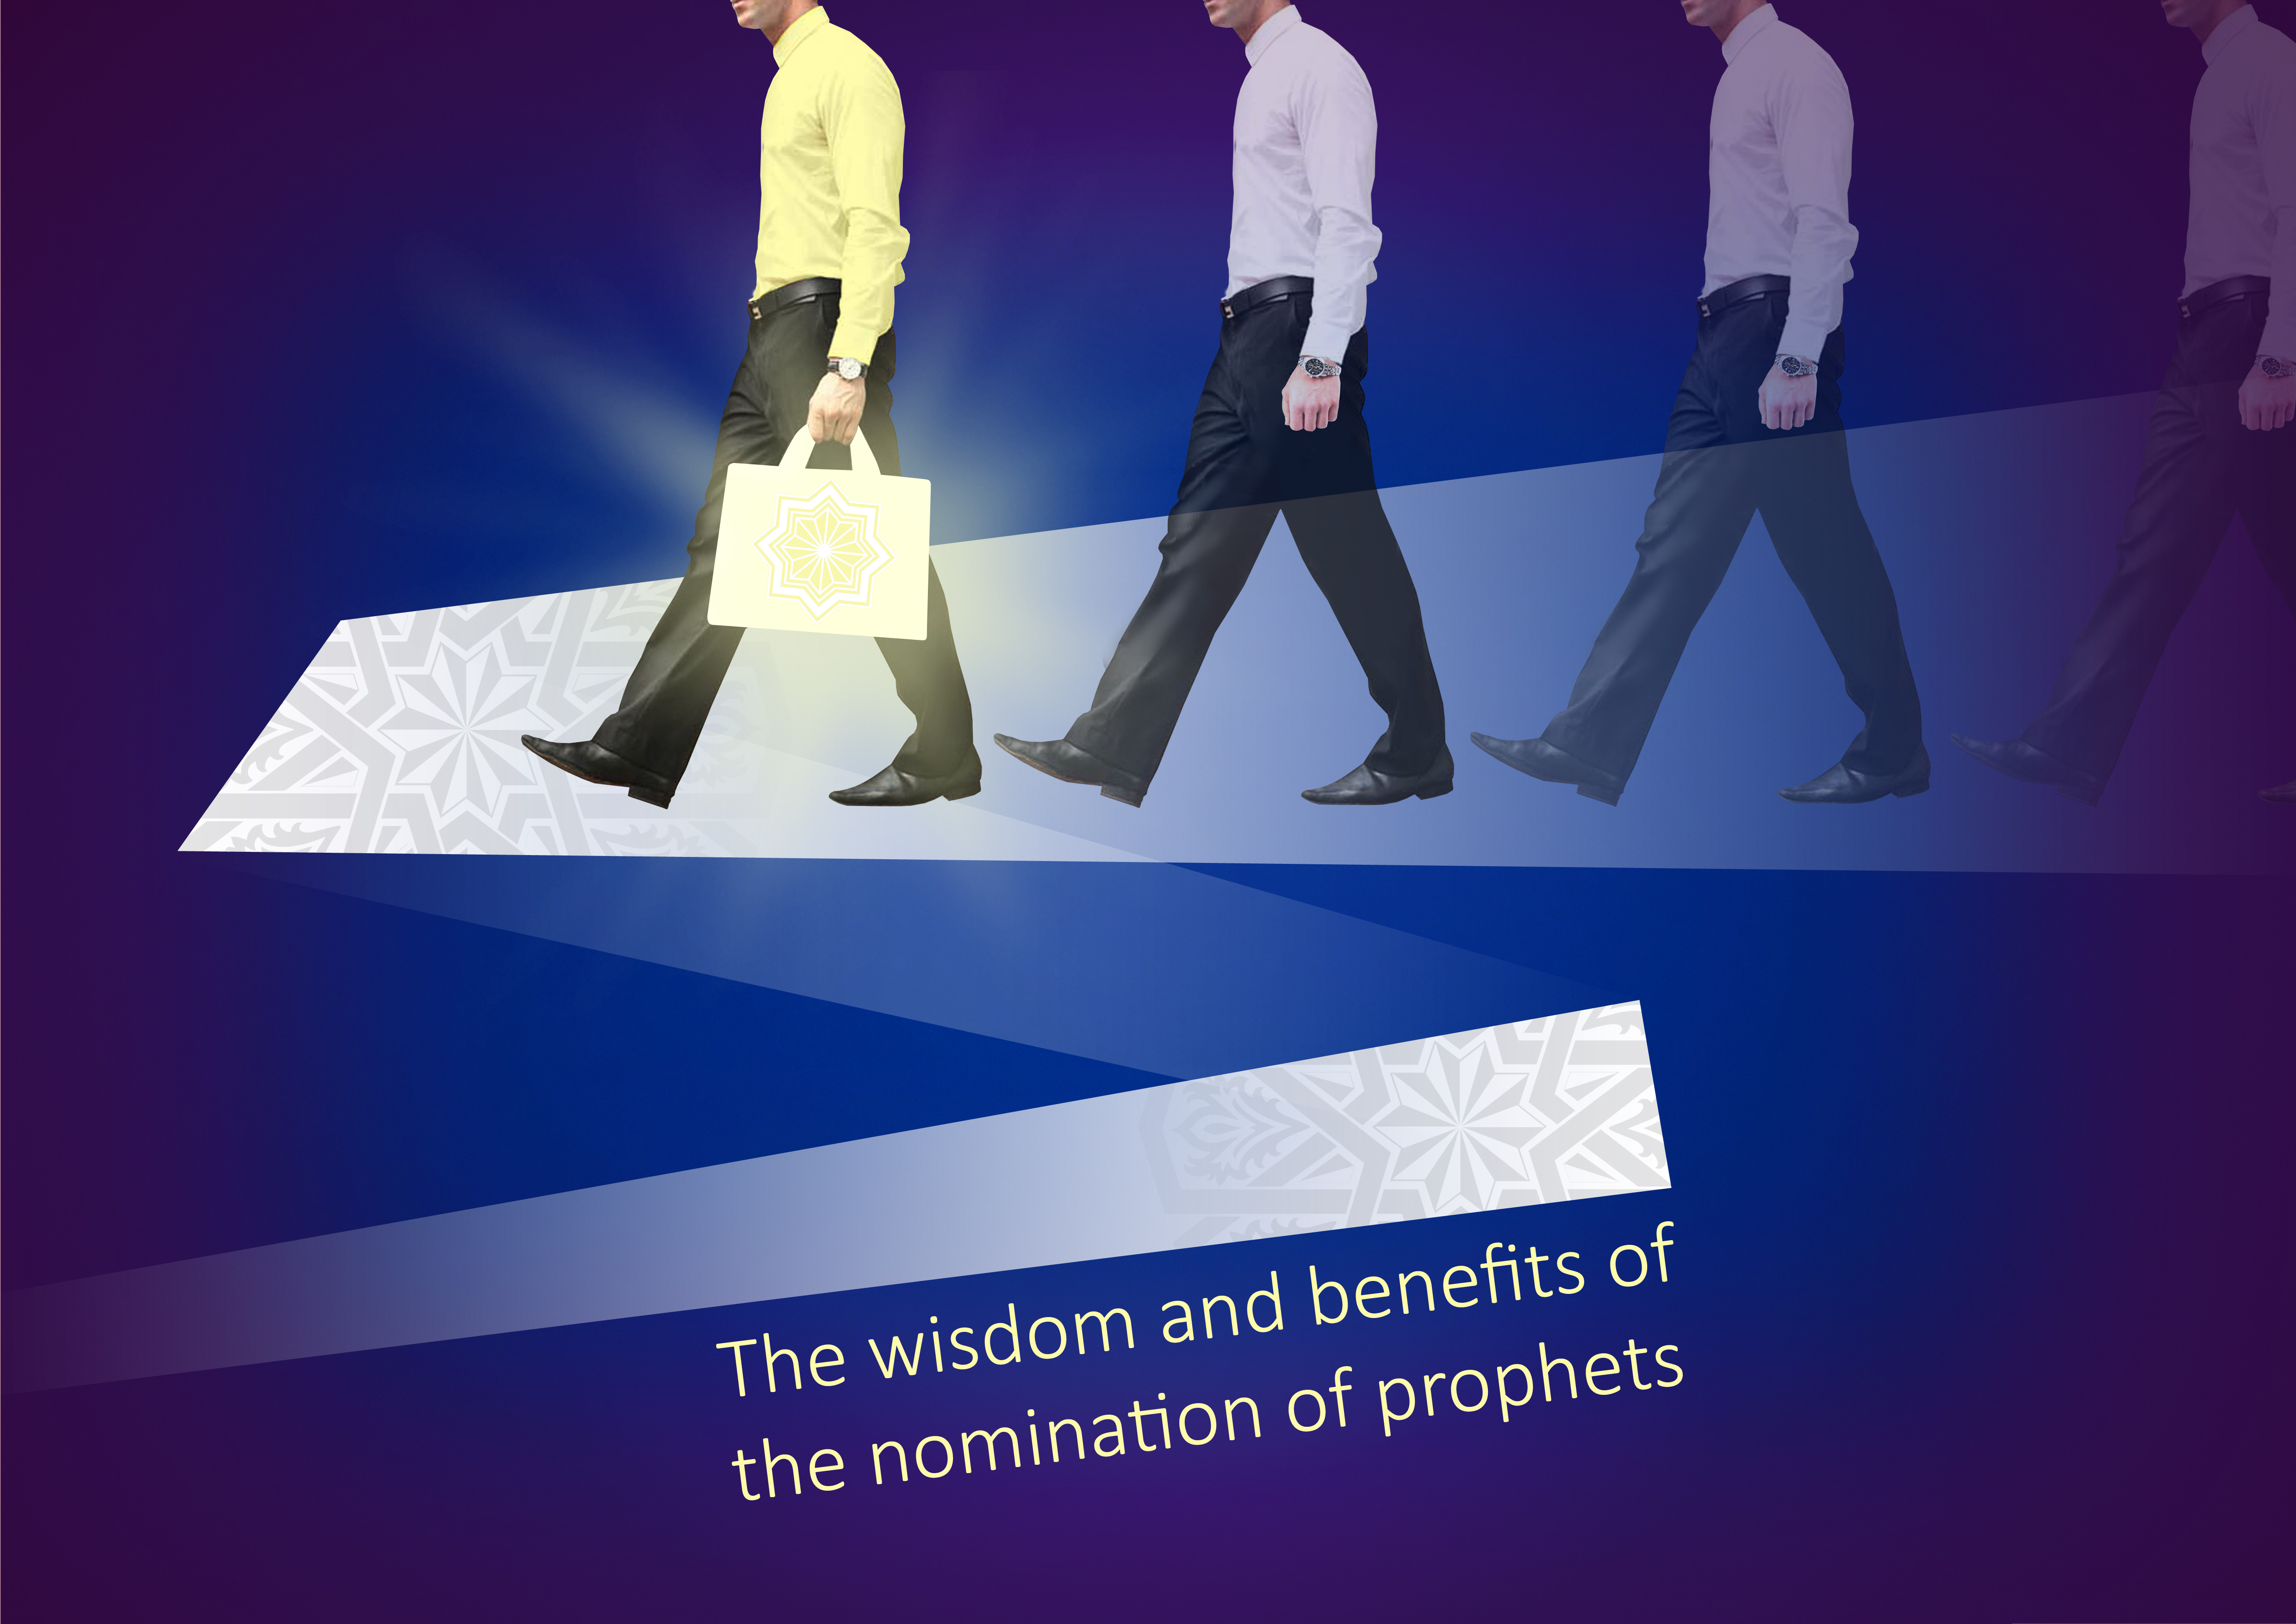 The wisdom and benefites of the nomination of prophets